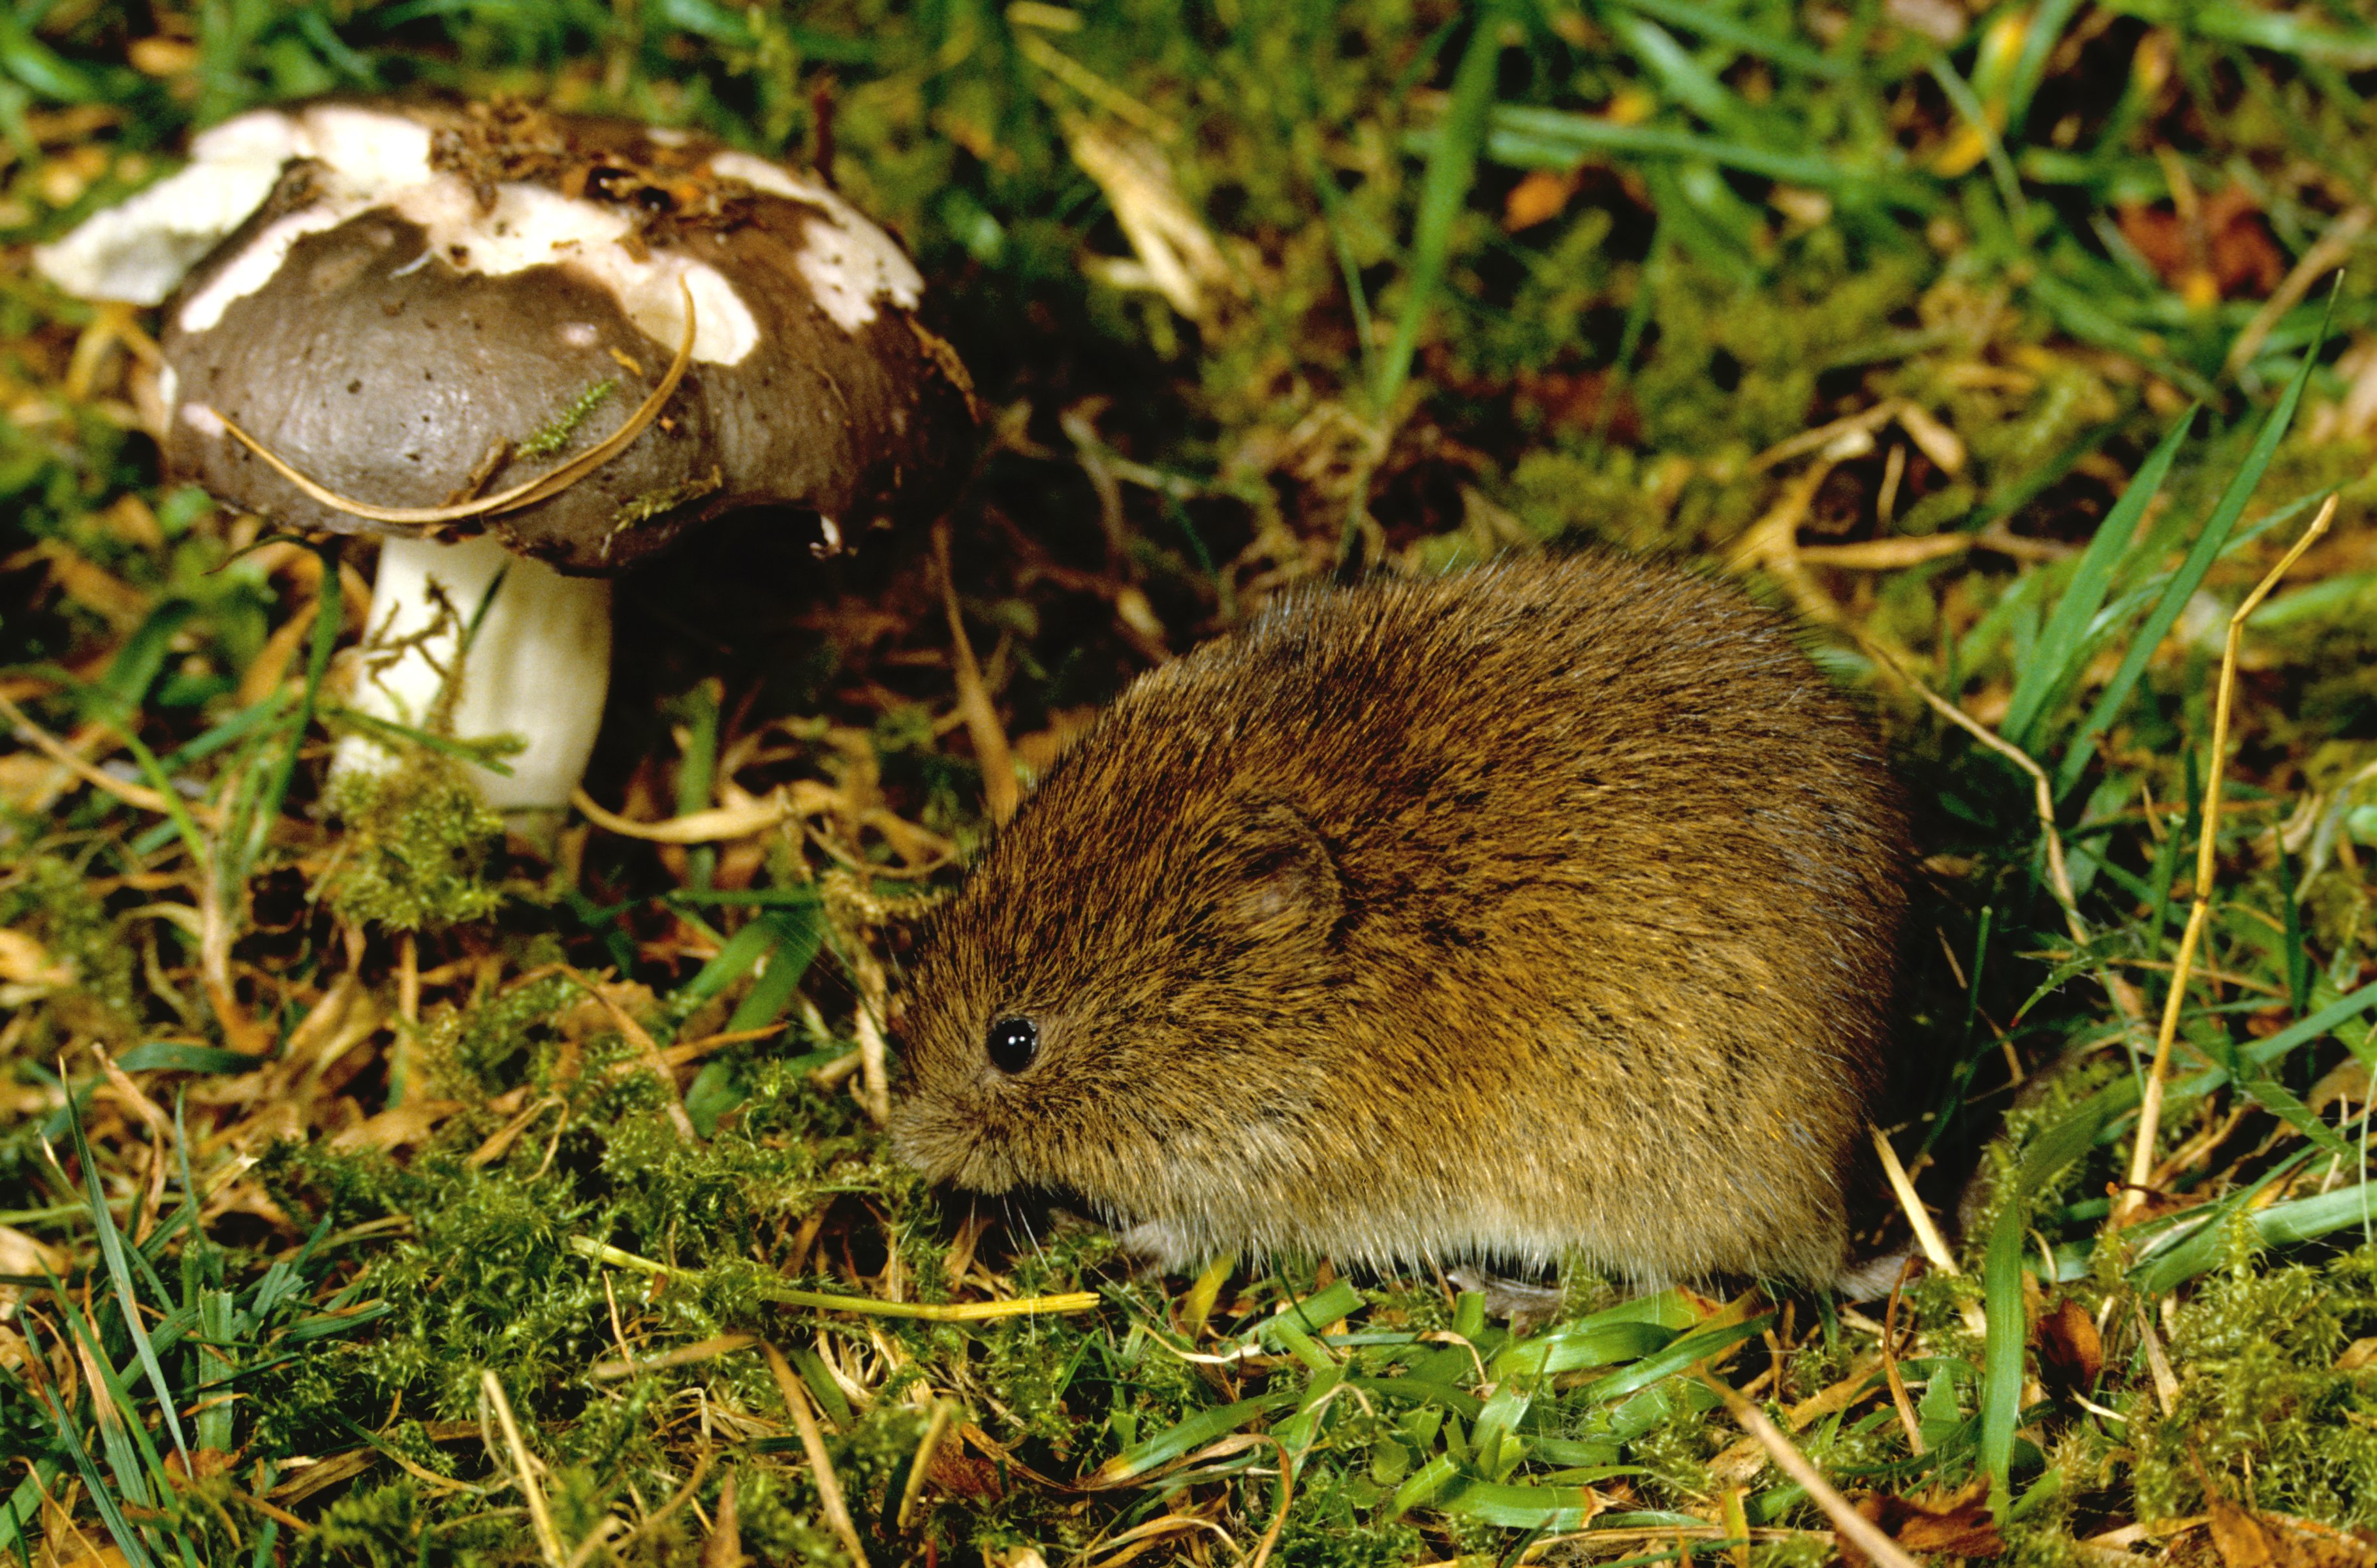 A close-up vole sits on a grassy site. There is a mushroom just ahead of it. 